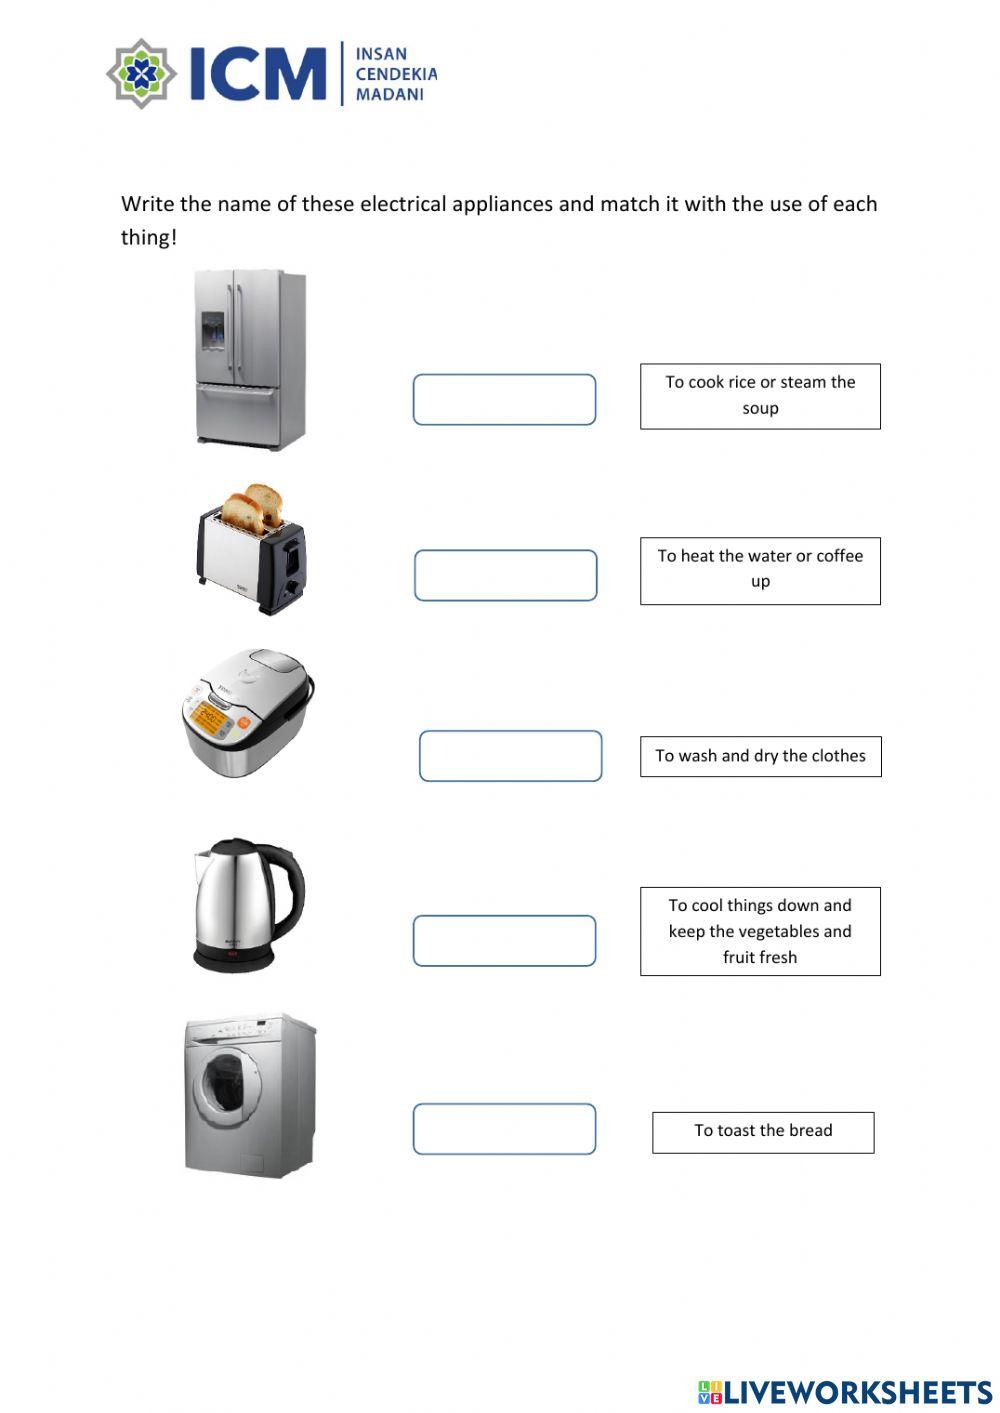 Uses of electrical appliances